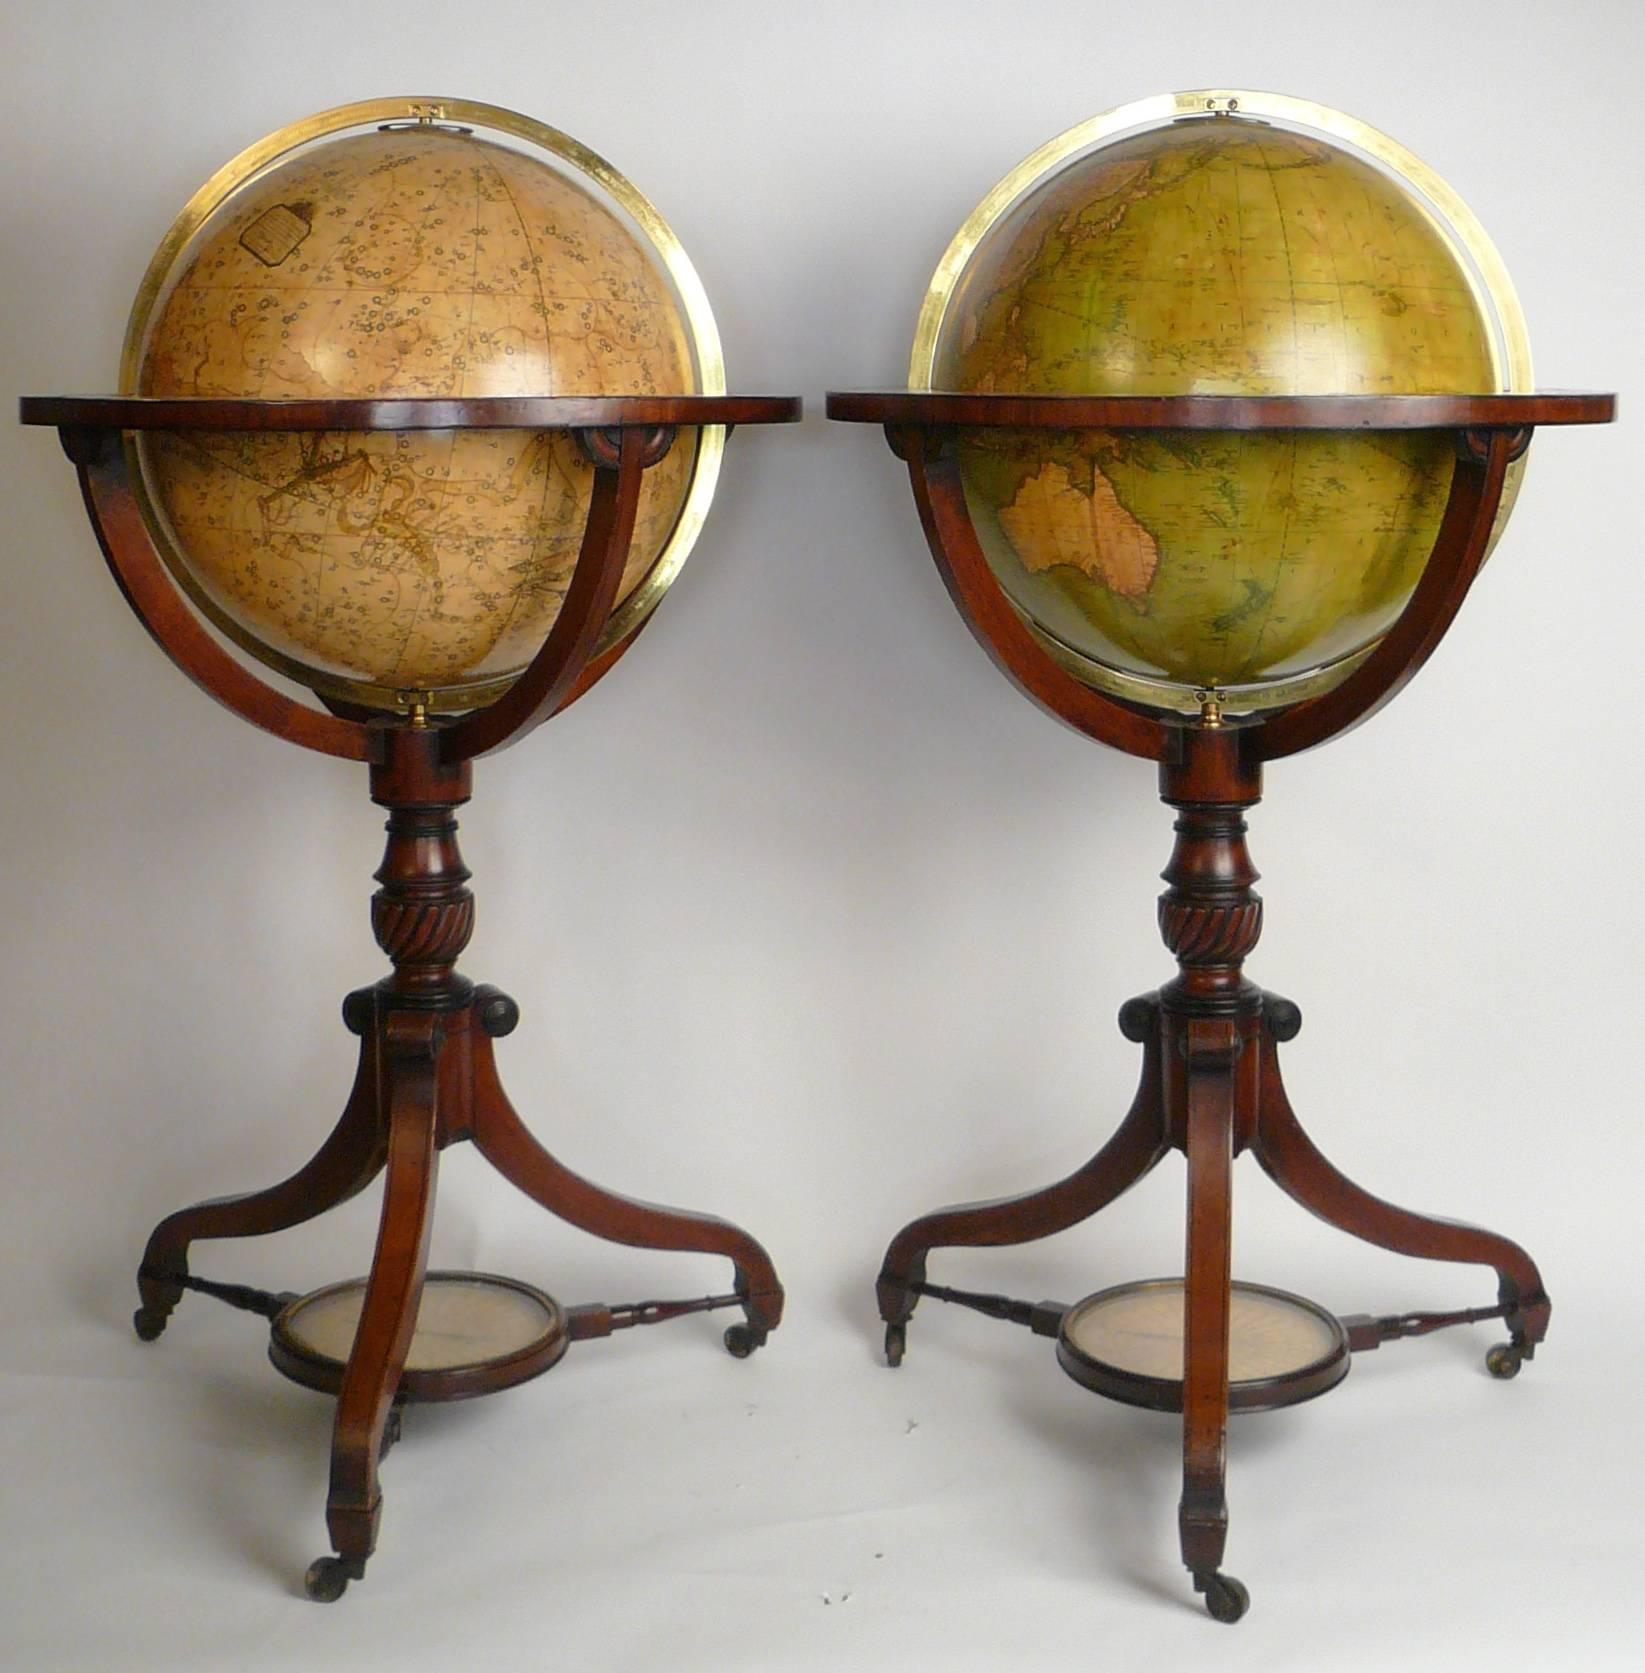 These fine terrestrial and celestial spheres, in brass meridian and horizon rings are supported by four arms, on gadrooned, and ring turned mahogany columns. Terminating in tripod spade feet, the turned stretchers incorporate a brass bezeled